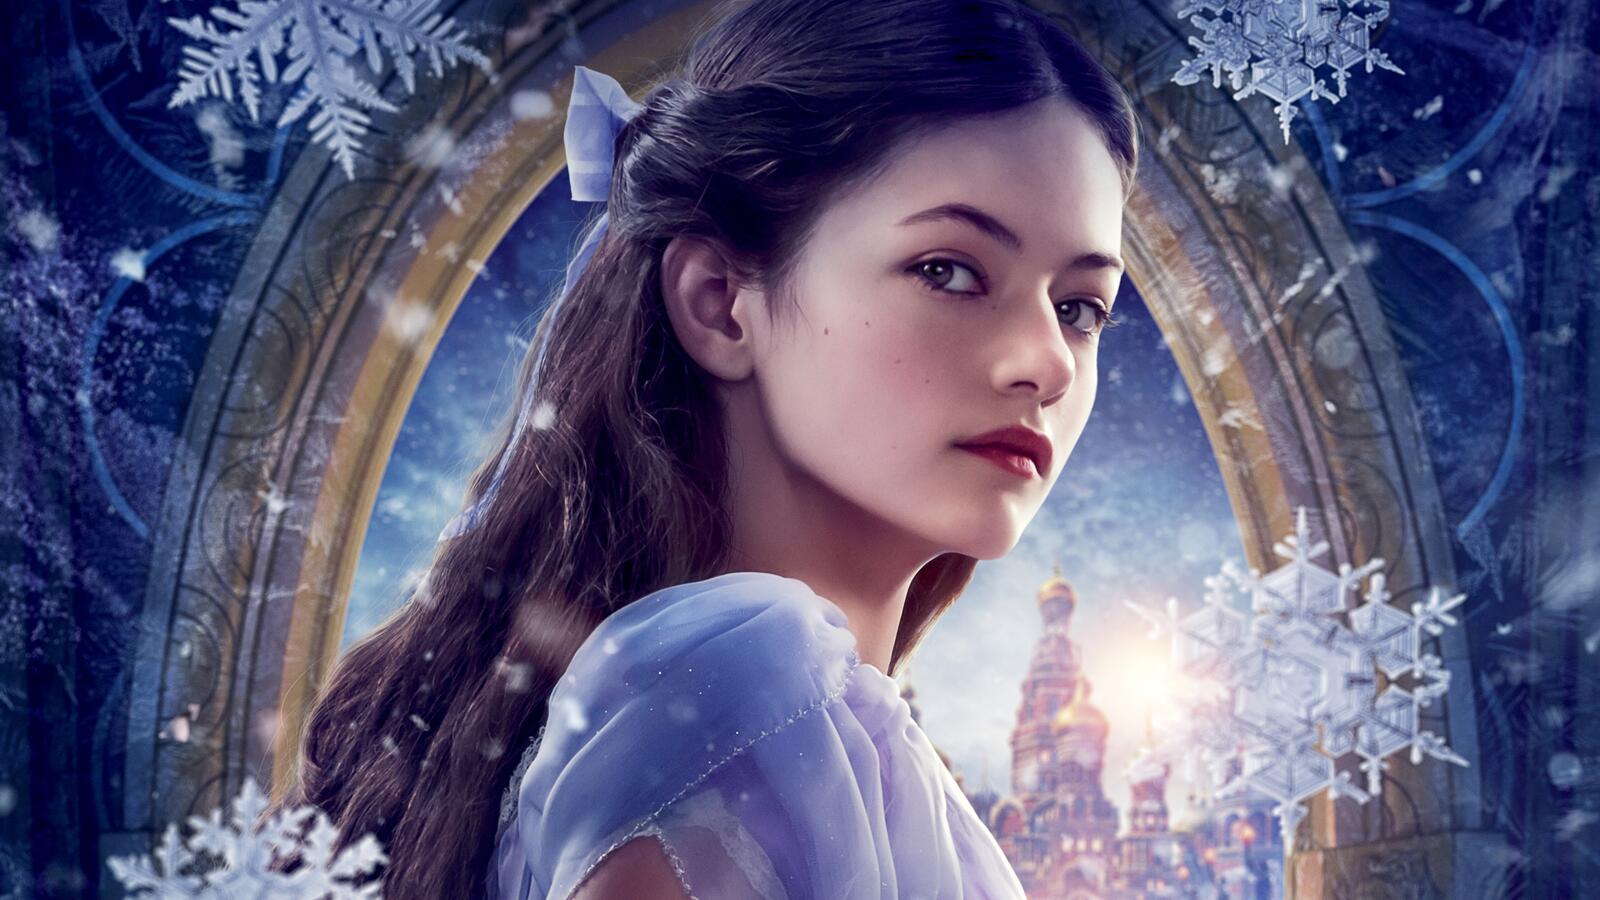 Wallpapers wallpaper the nutcracker and the four realms mackenzie foy girl on the desktop